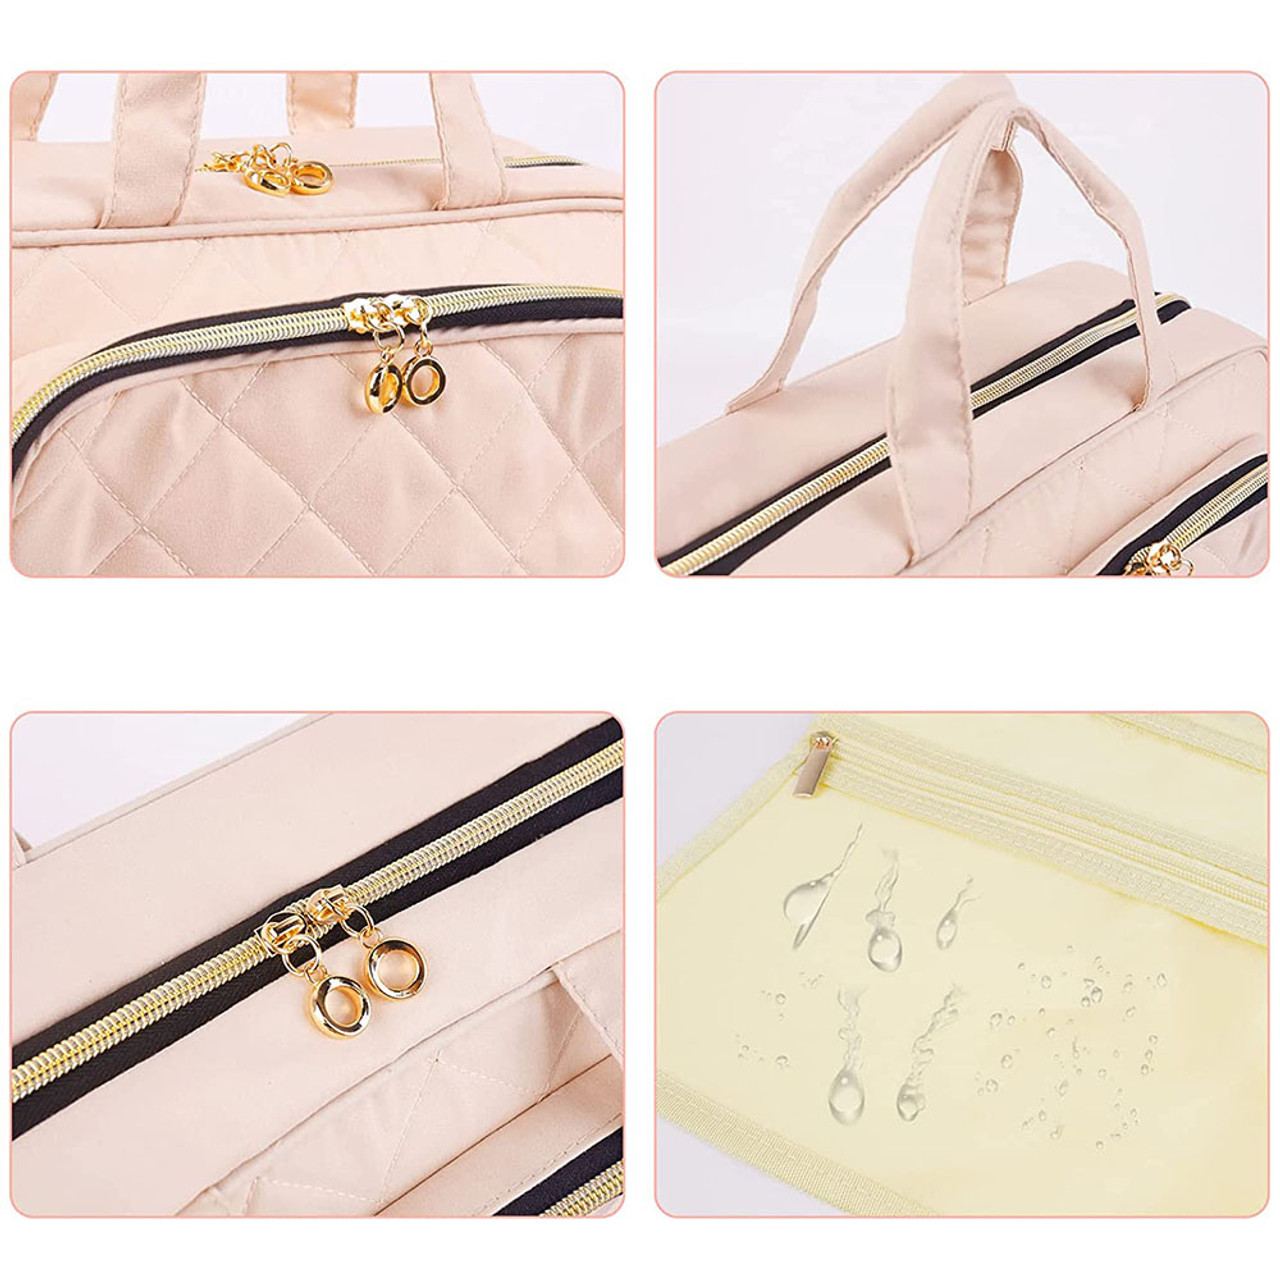 Hanging Toiletry Bag for Women product image